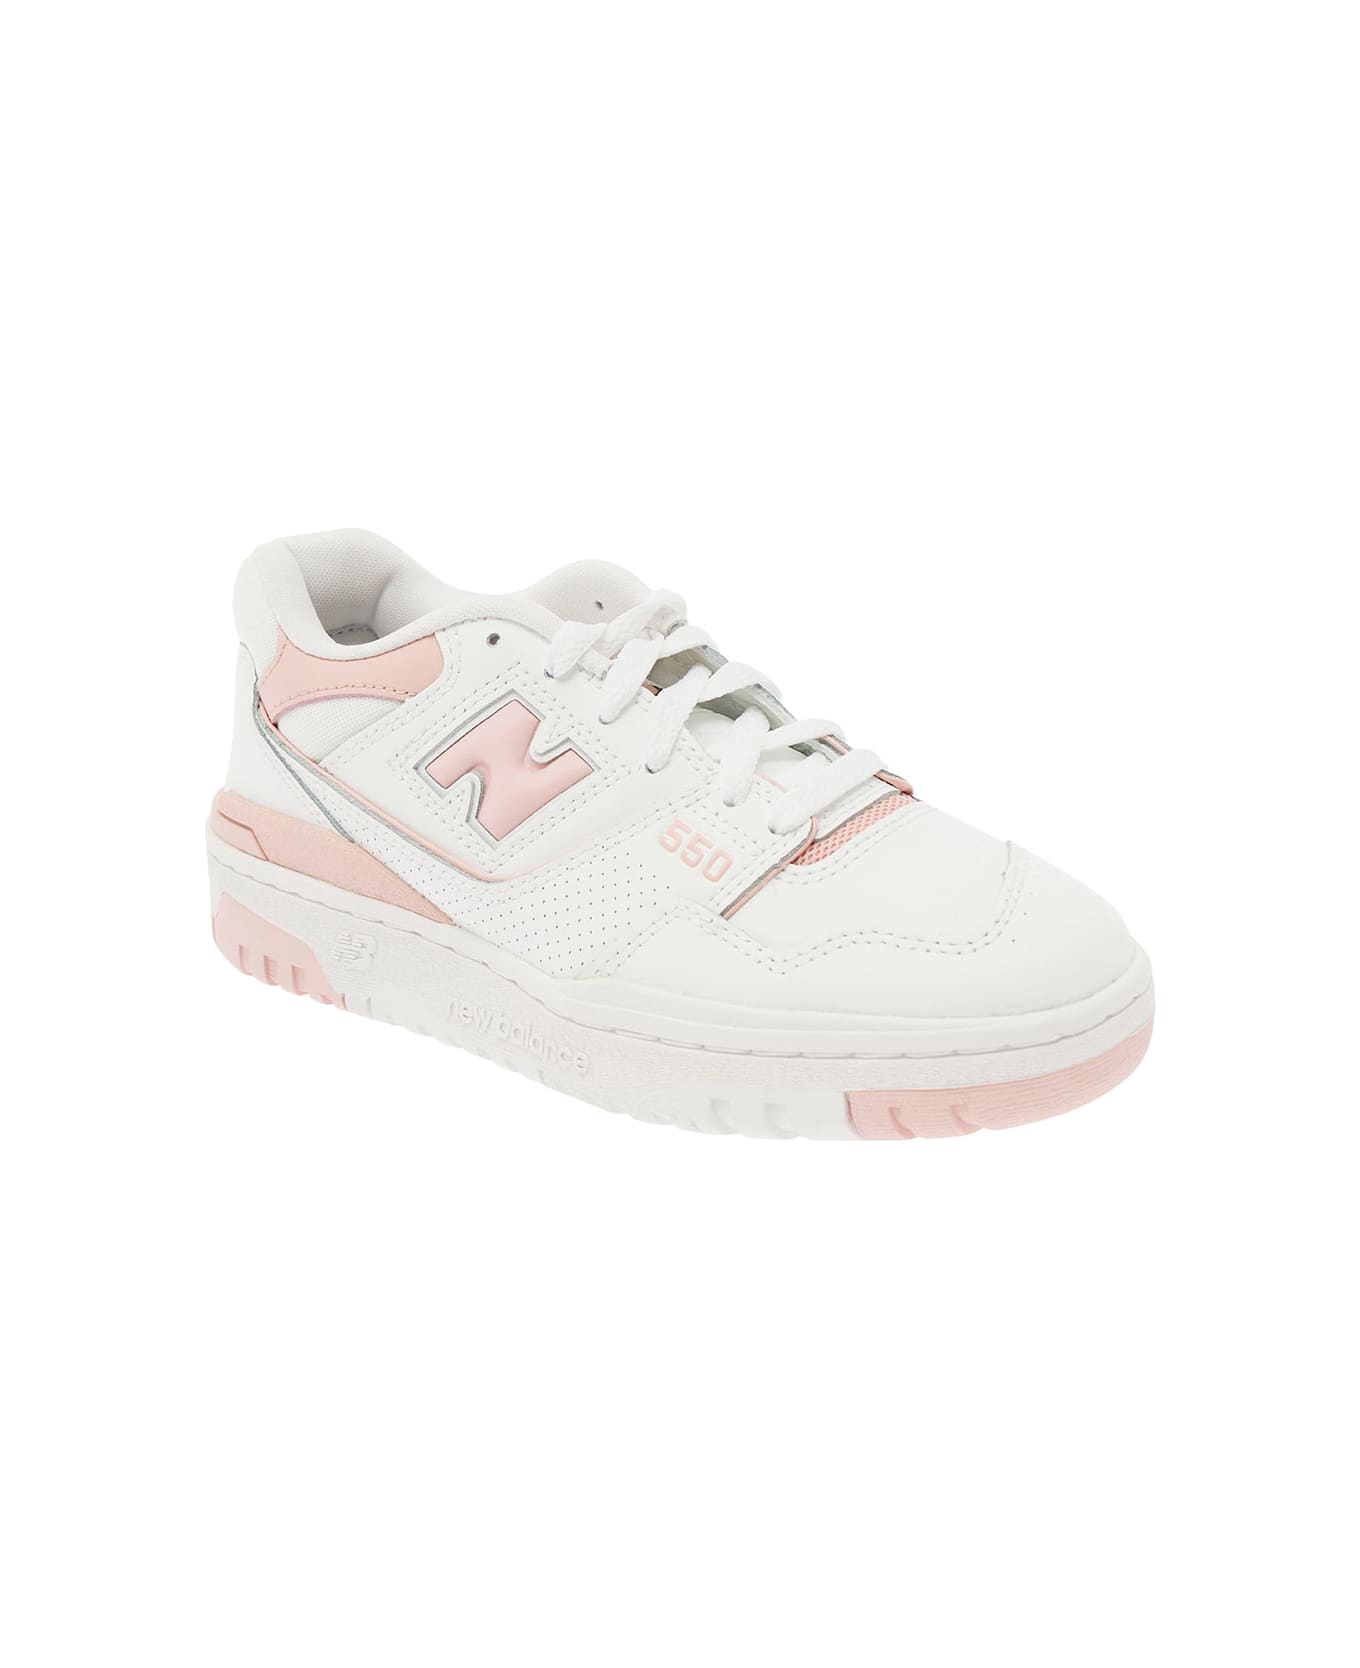 New Balance '550' White And Light Pink Low Top Sneakers With Logo In Leather Woman - Pink スニーカー